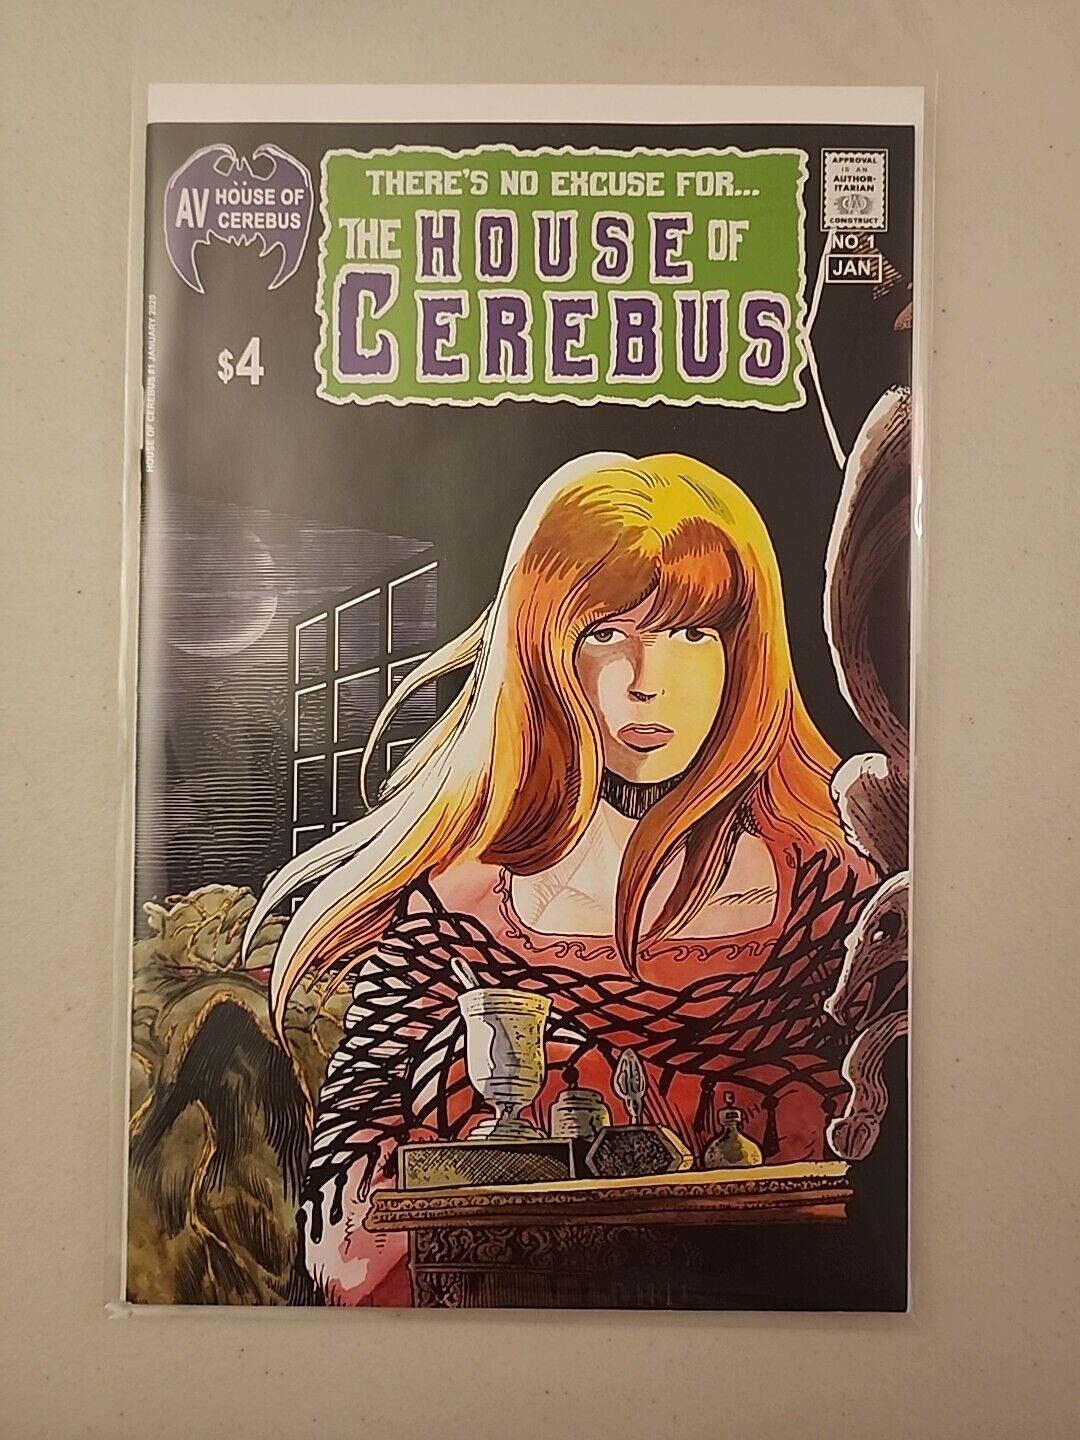 THE HOUSE OF CEREBUS # 1 NM MATURE READERS  COMICS SWAMP THING  HOMAGE COVER 202